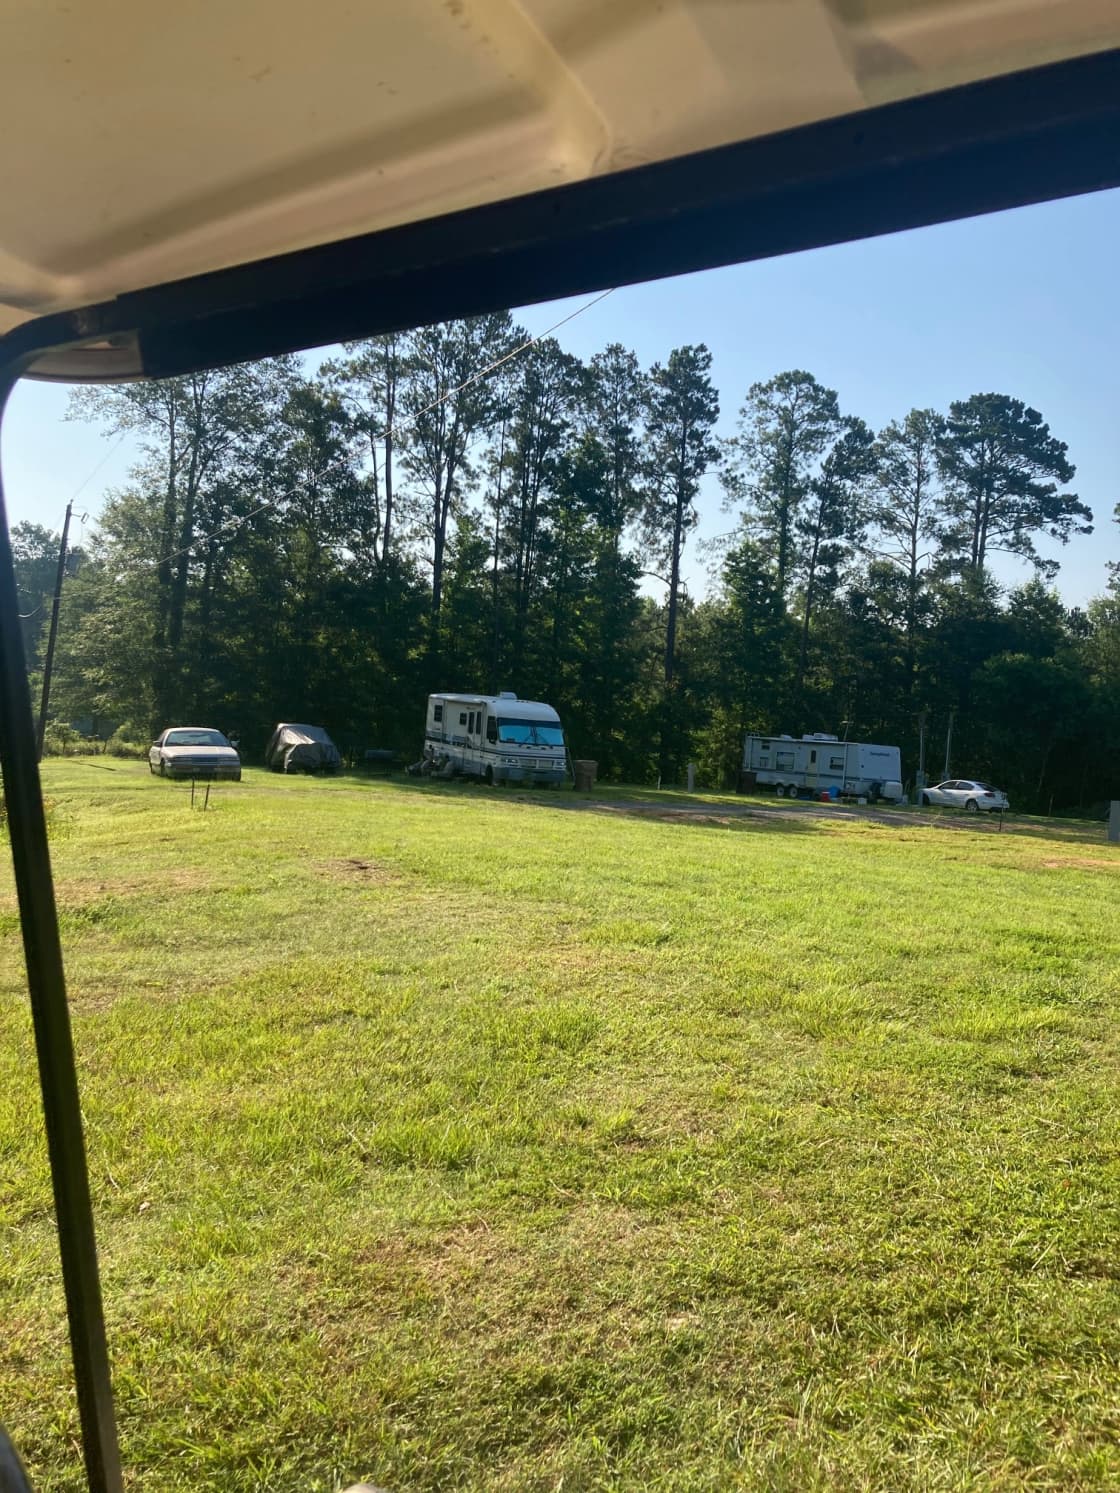 RV  park and tent camps